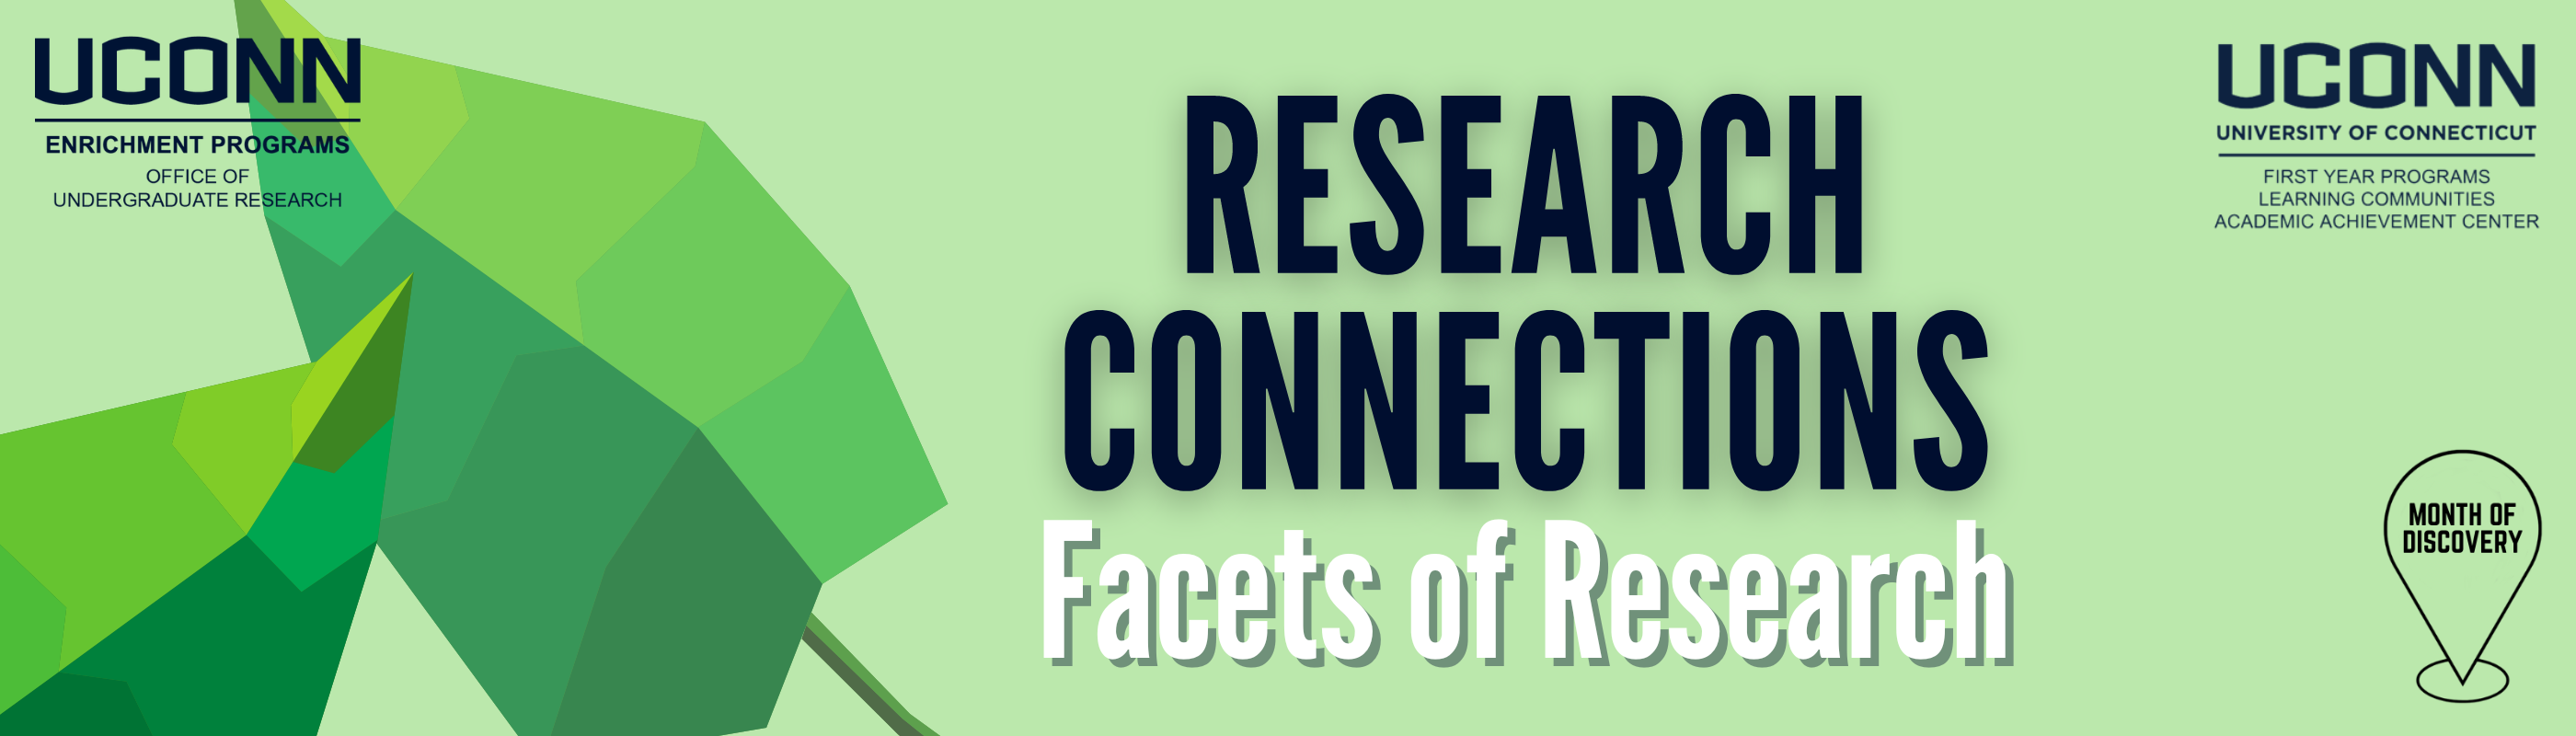 Research Connections: Facets of Research